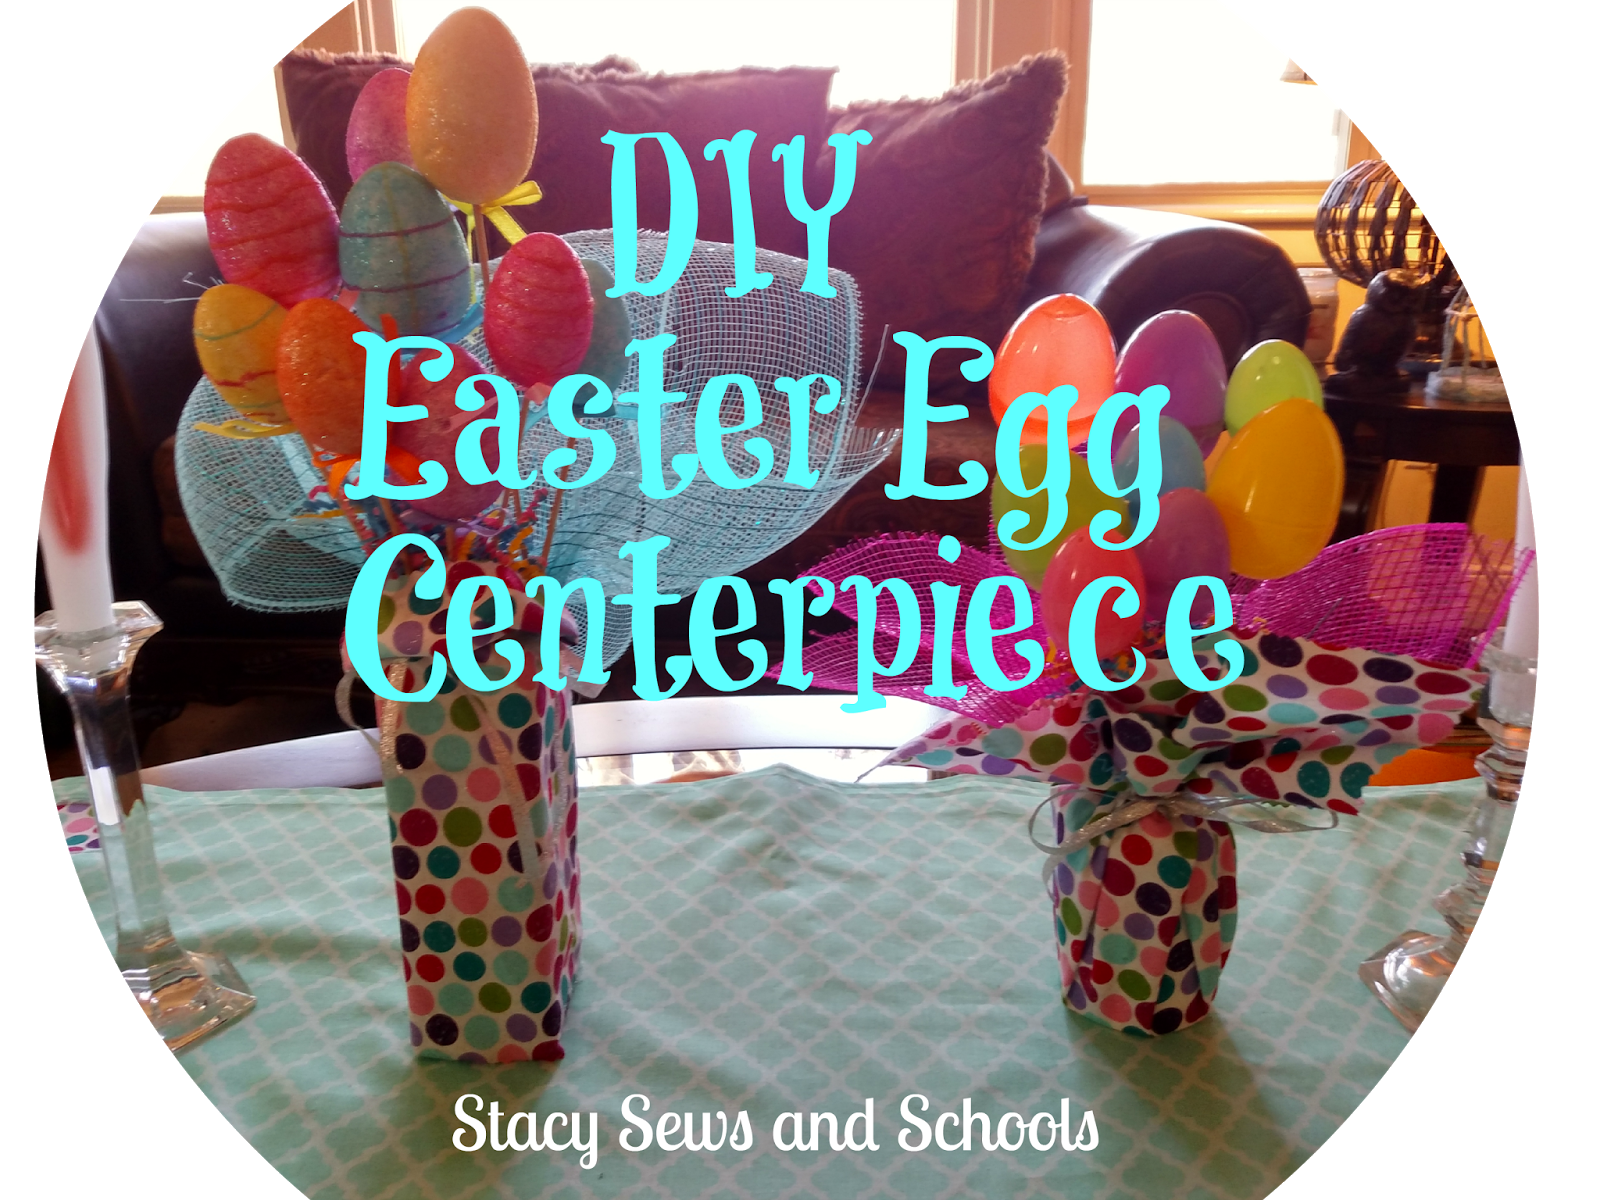 Stacy Sews and Schools DIY Easter Egg Centerpiece